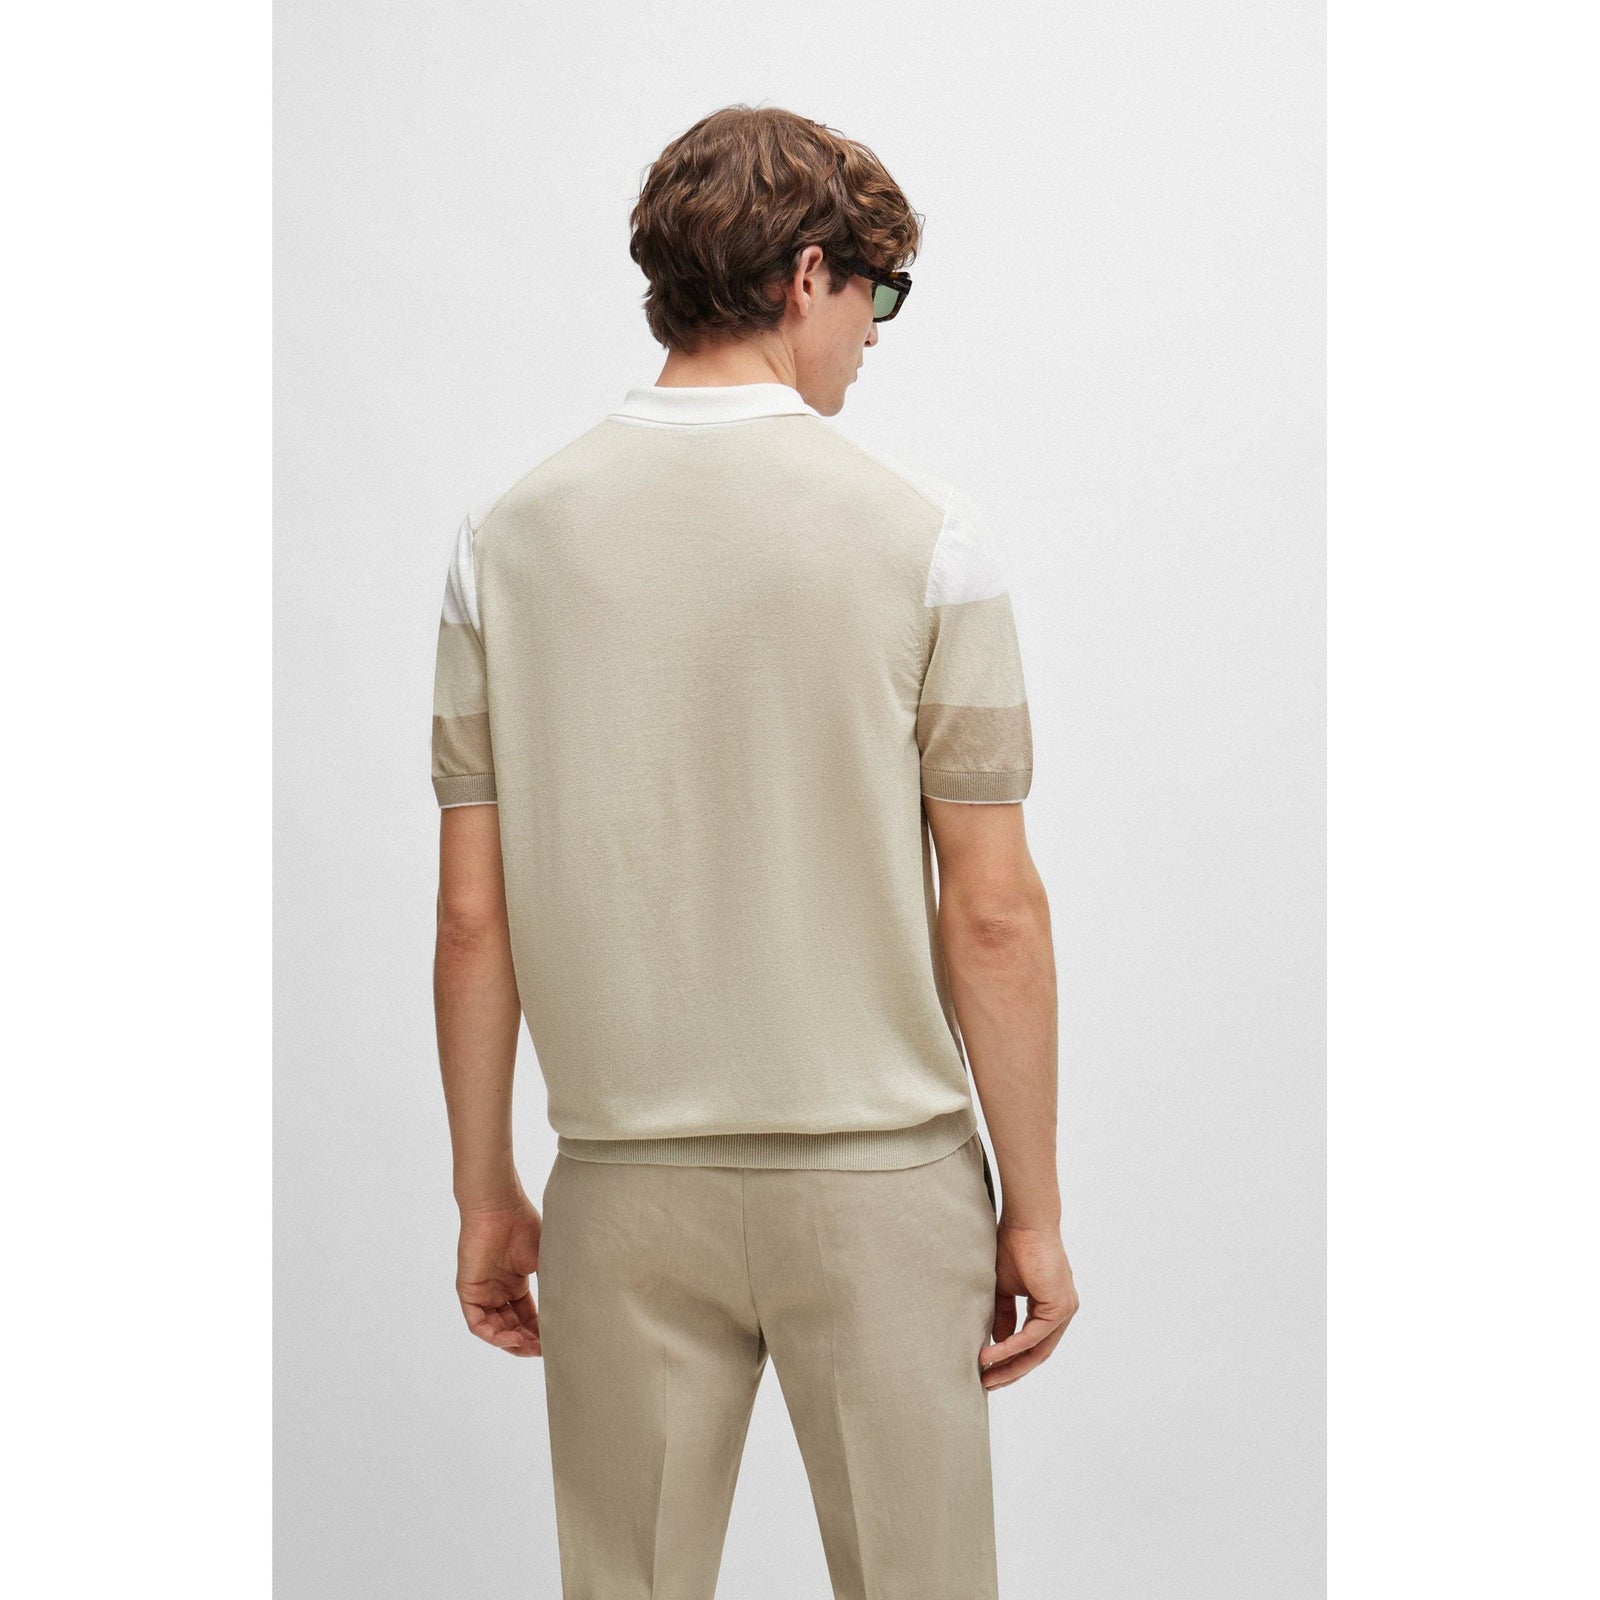 BOSS POLO-STYLE SWEATER IN LINEN BLEND WITH ZIP COLLAR - Yooto